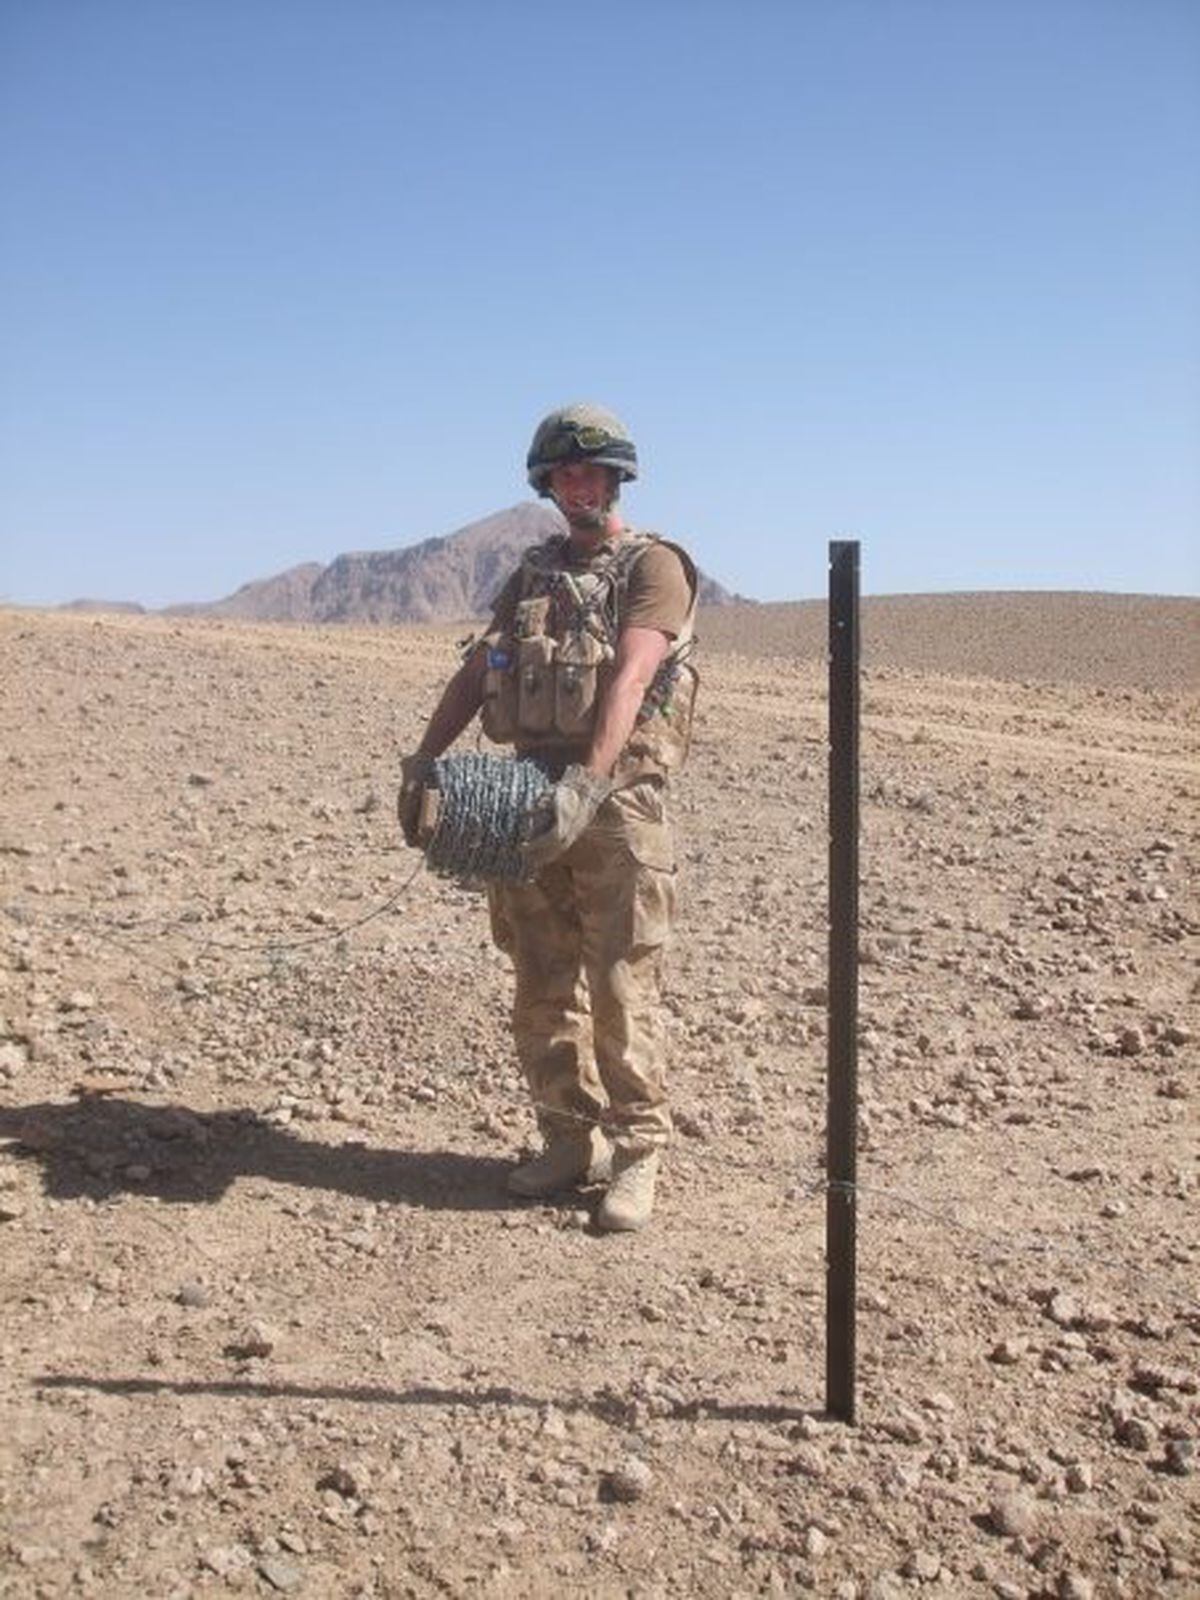 Clive on active duty in Afghanistan